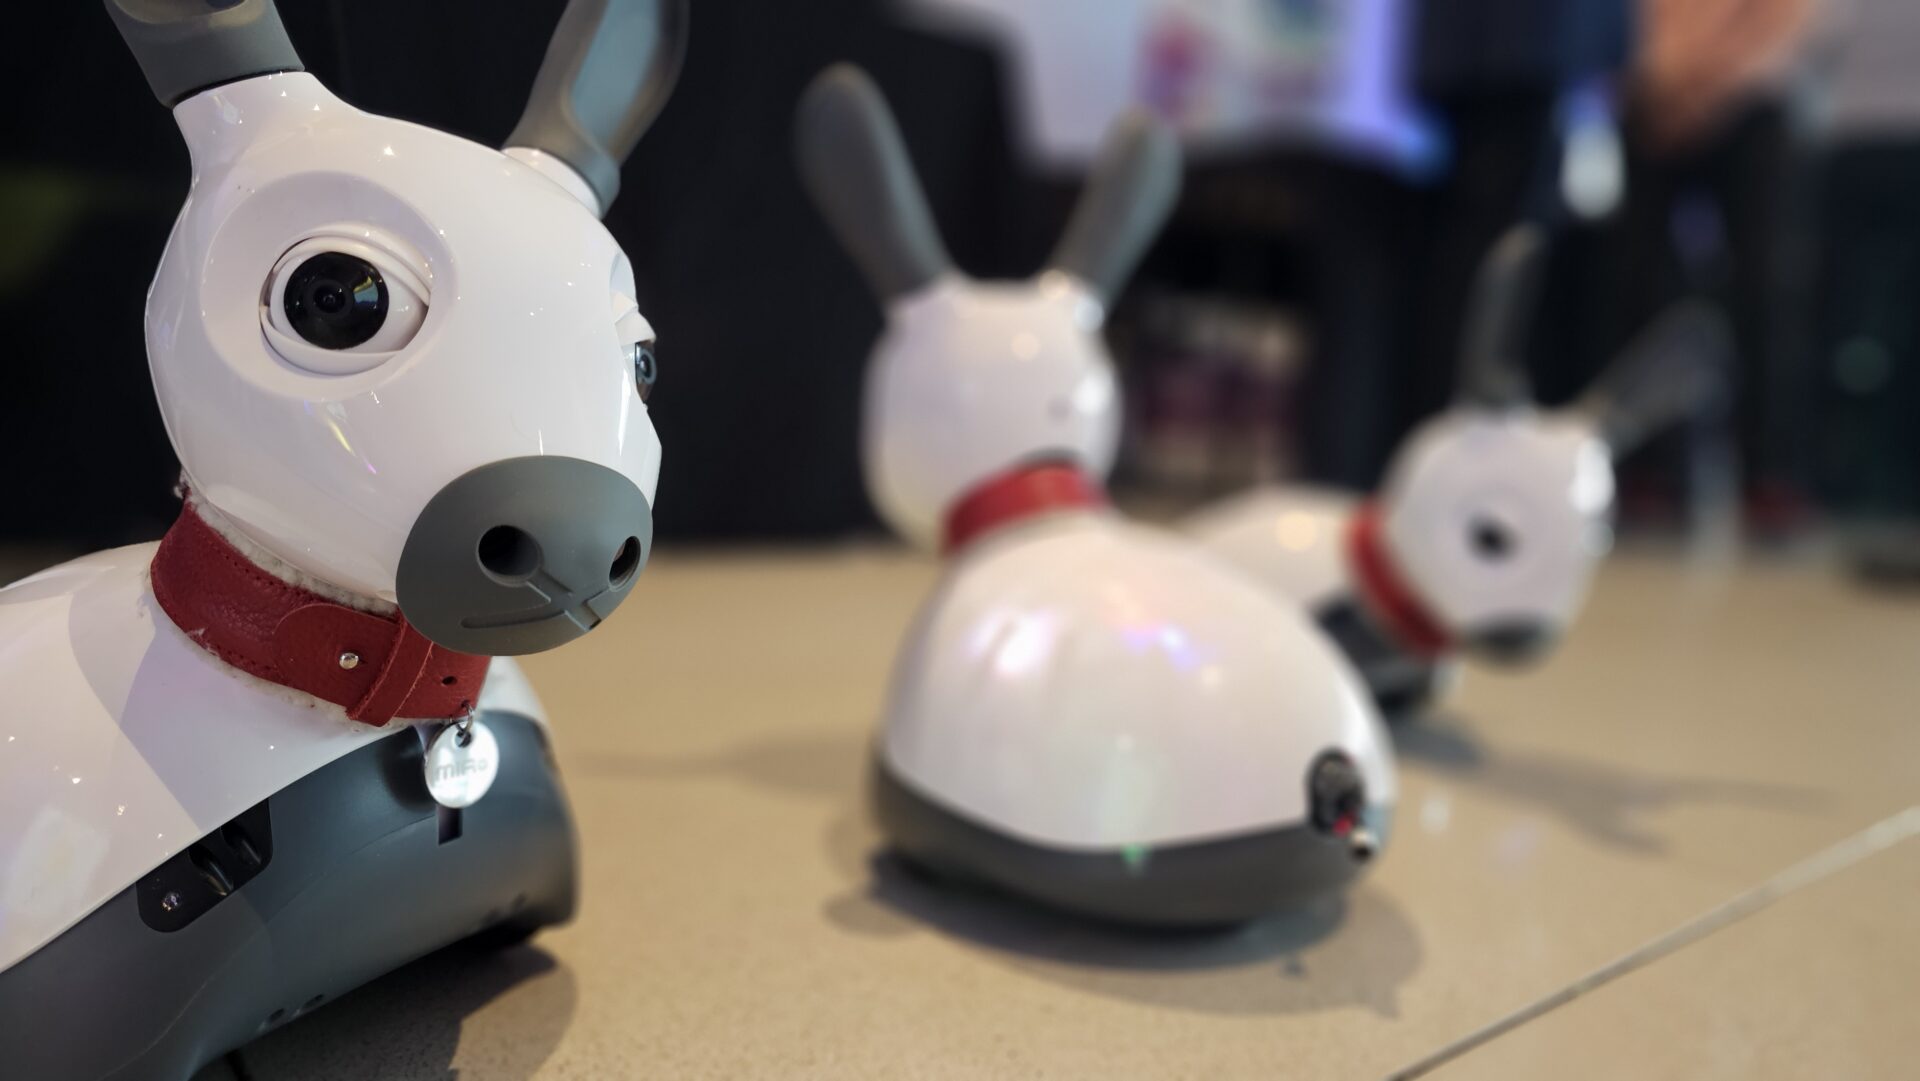 Three Miro robots resembling rabbits in white and black with red collars